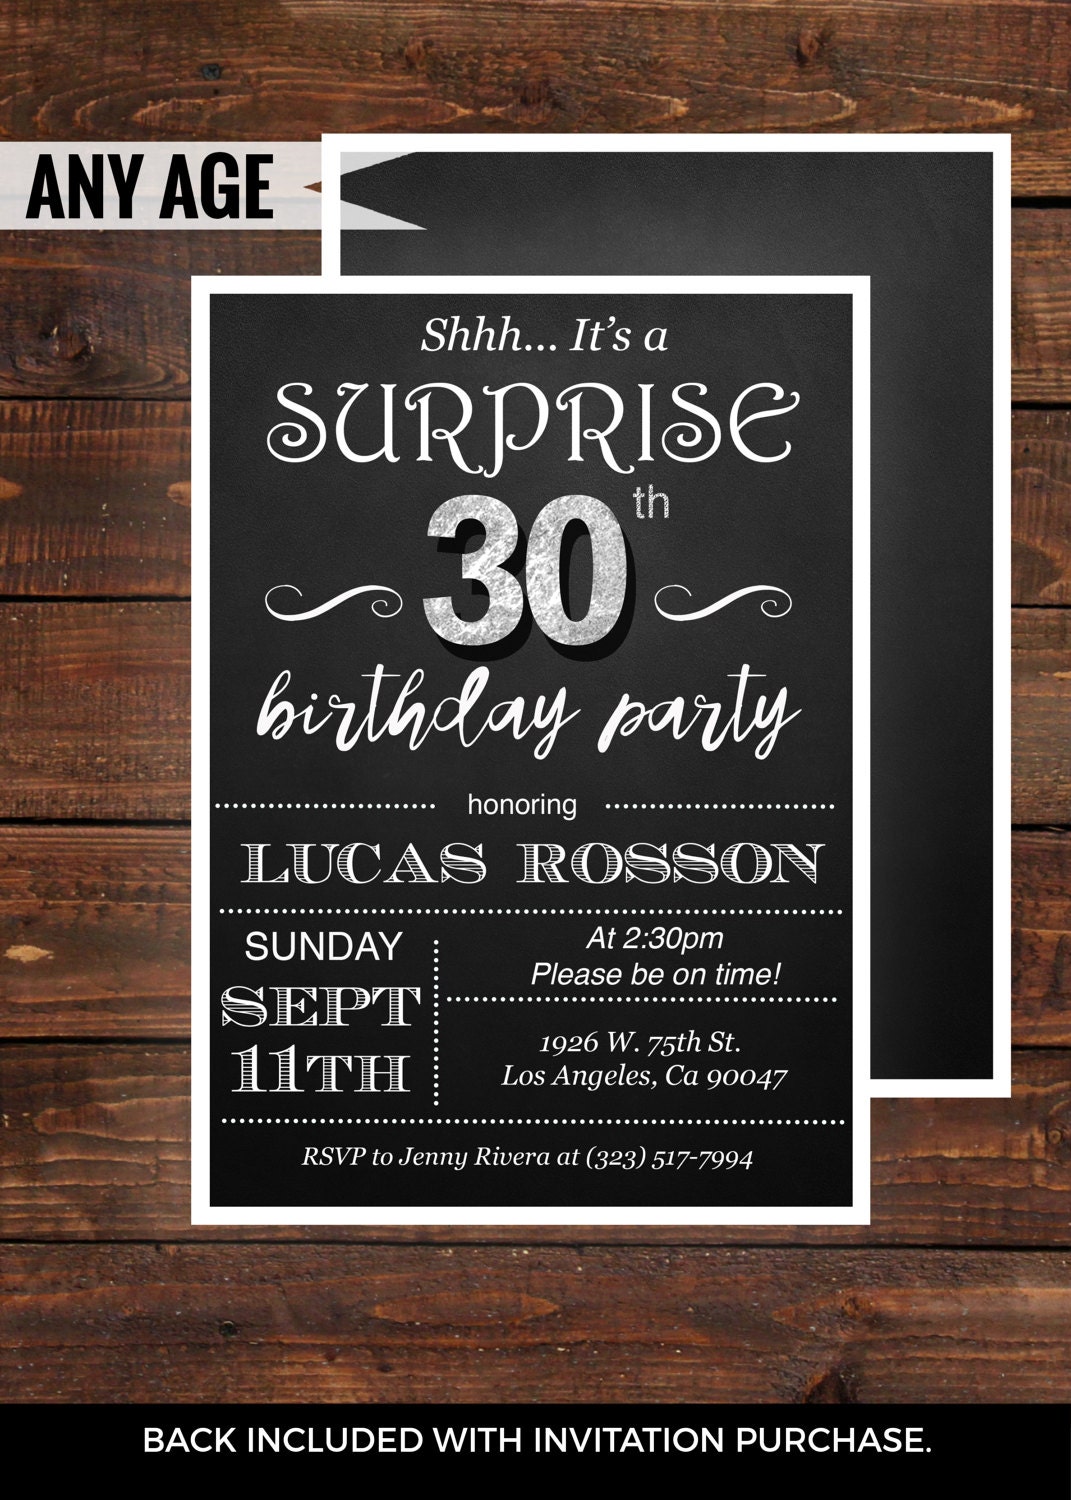 Surprise 30th birthday invitations for him by ...